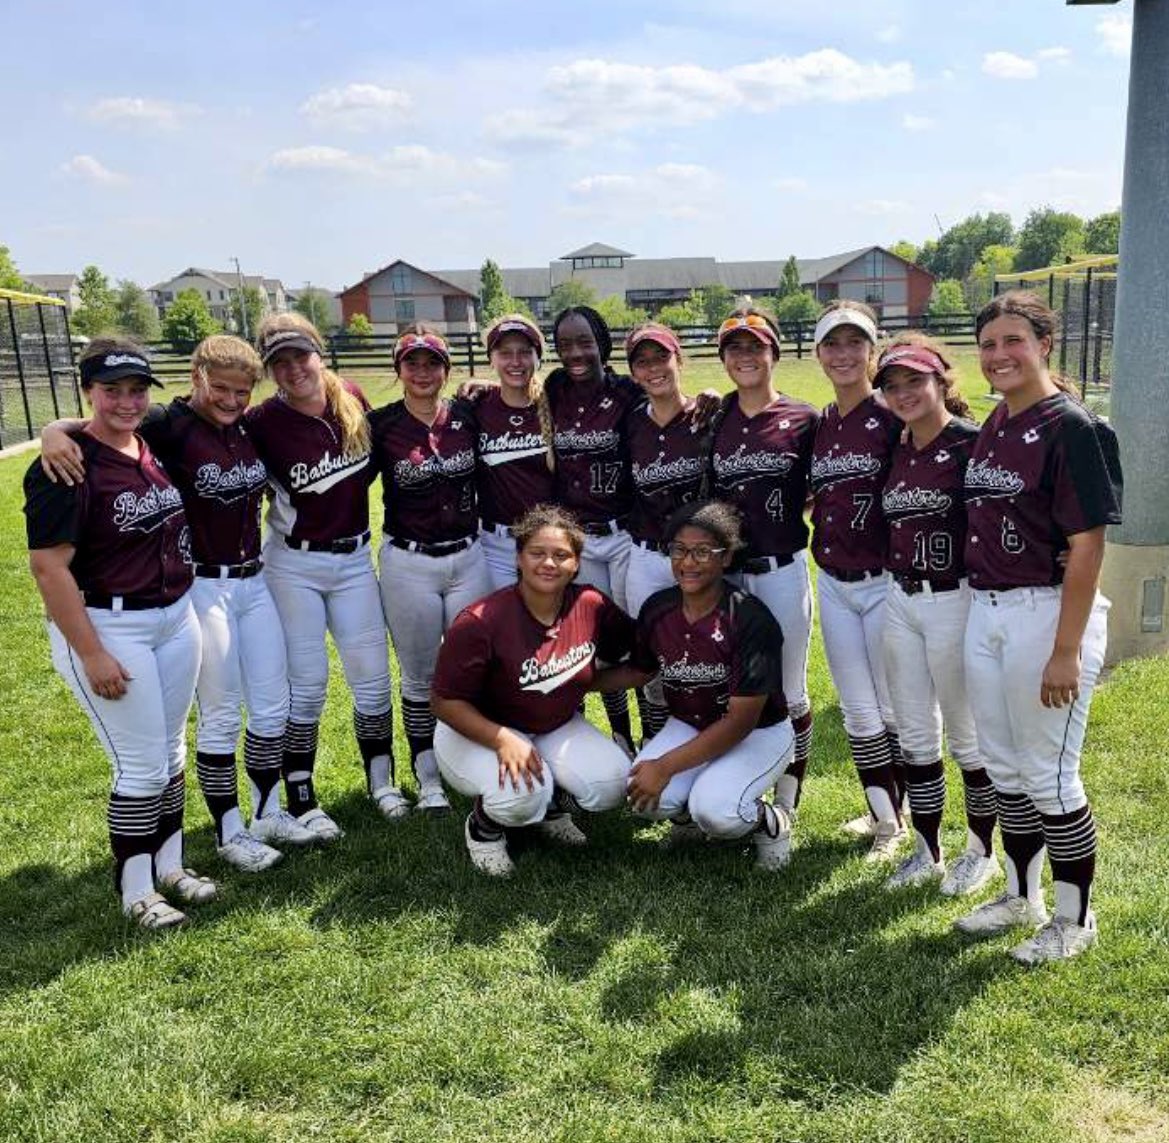 That’s a wrap for the 2022/2023 season. Picture taken at the Alliance Softball Nationals after our last game. This team finished the season with 72 wins, 34 loses and 5 ties. Such a great group of hard working young ladies that have bright futures ahead of them.